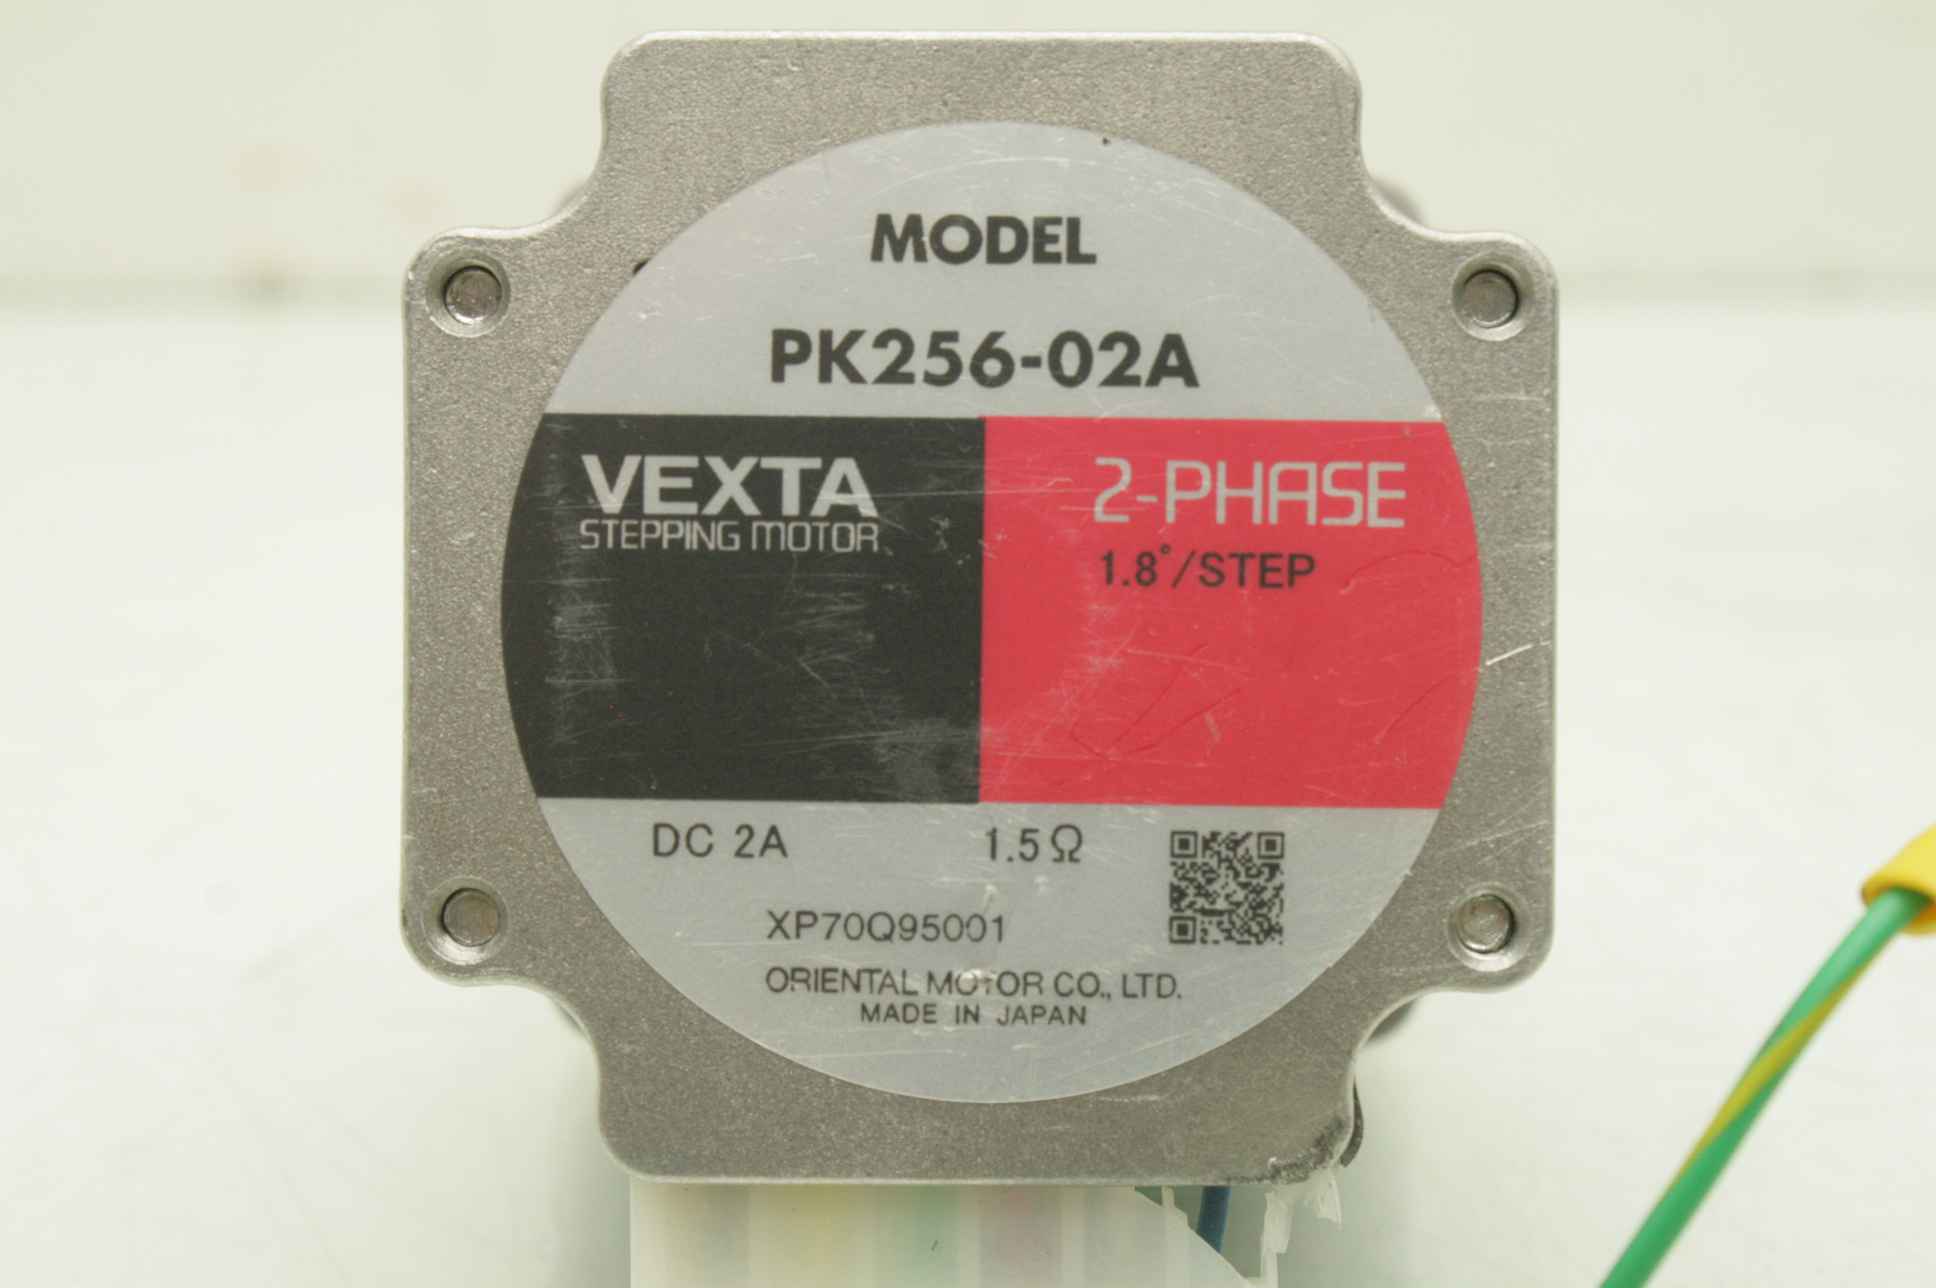 DC-2A Details about   Oriental Motors Vexta PK256-02A Stepper Motor 2-Phase 1.8° 